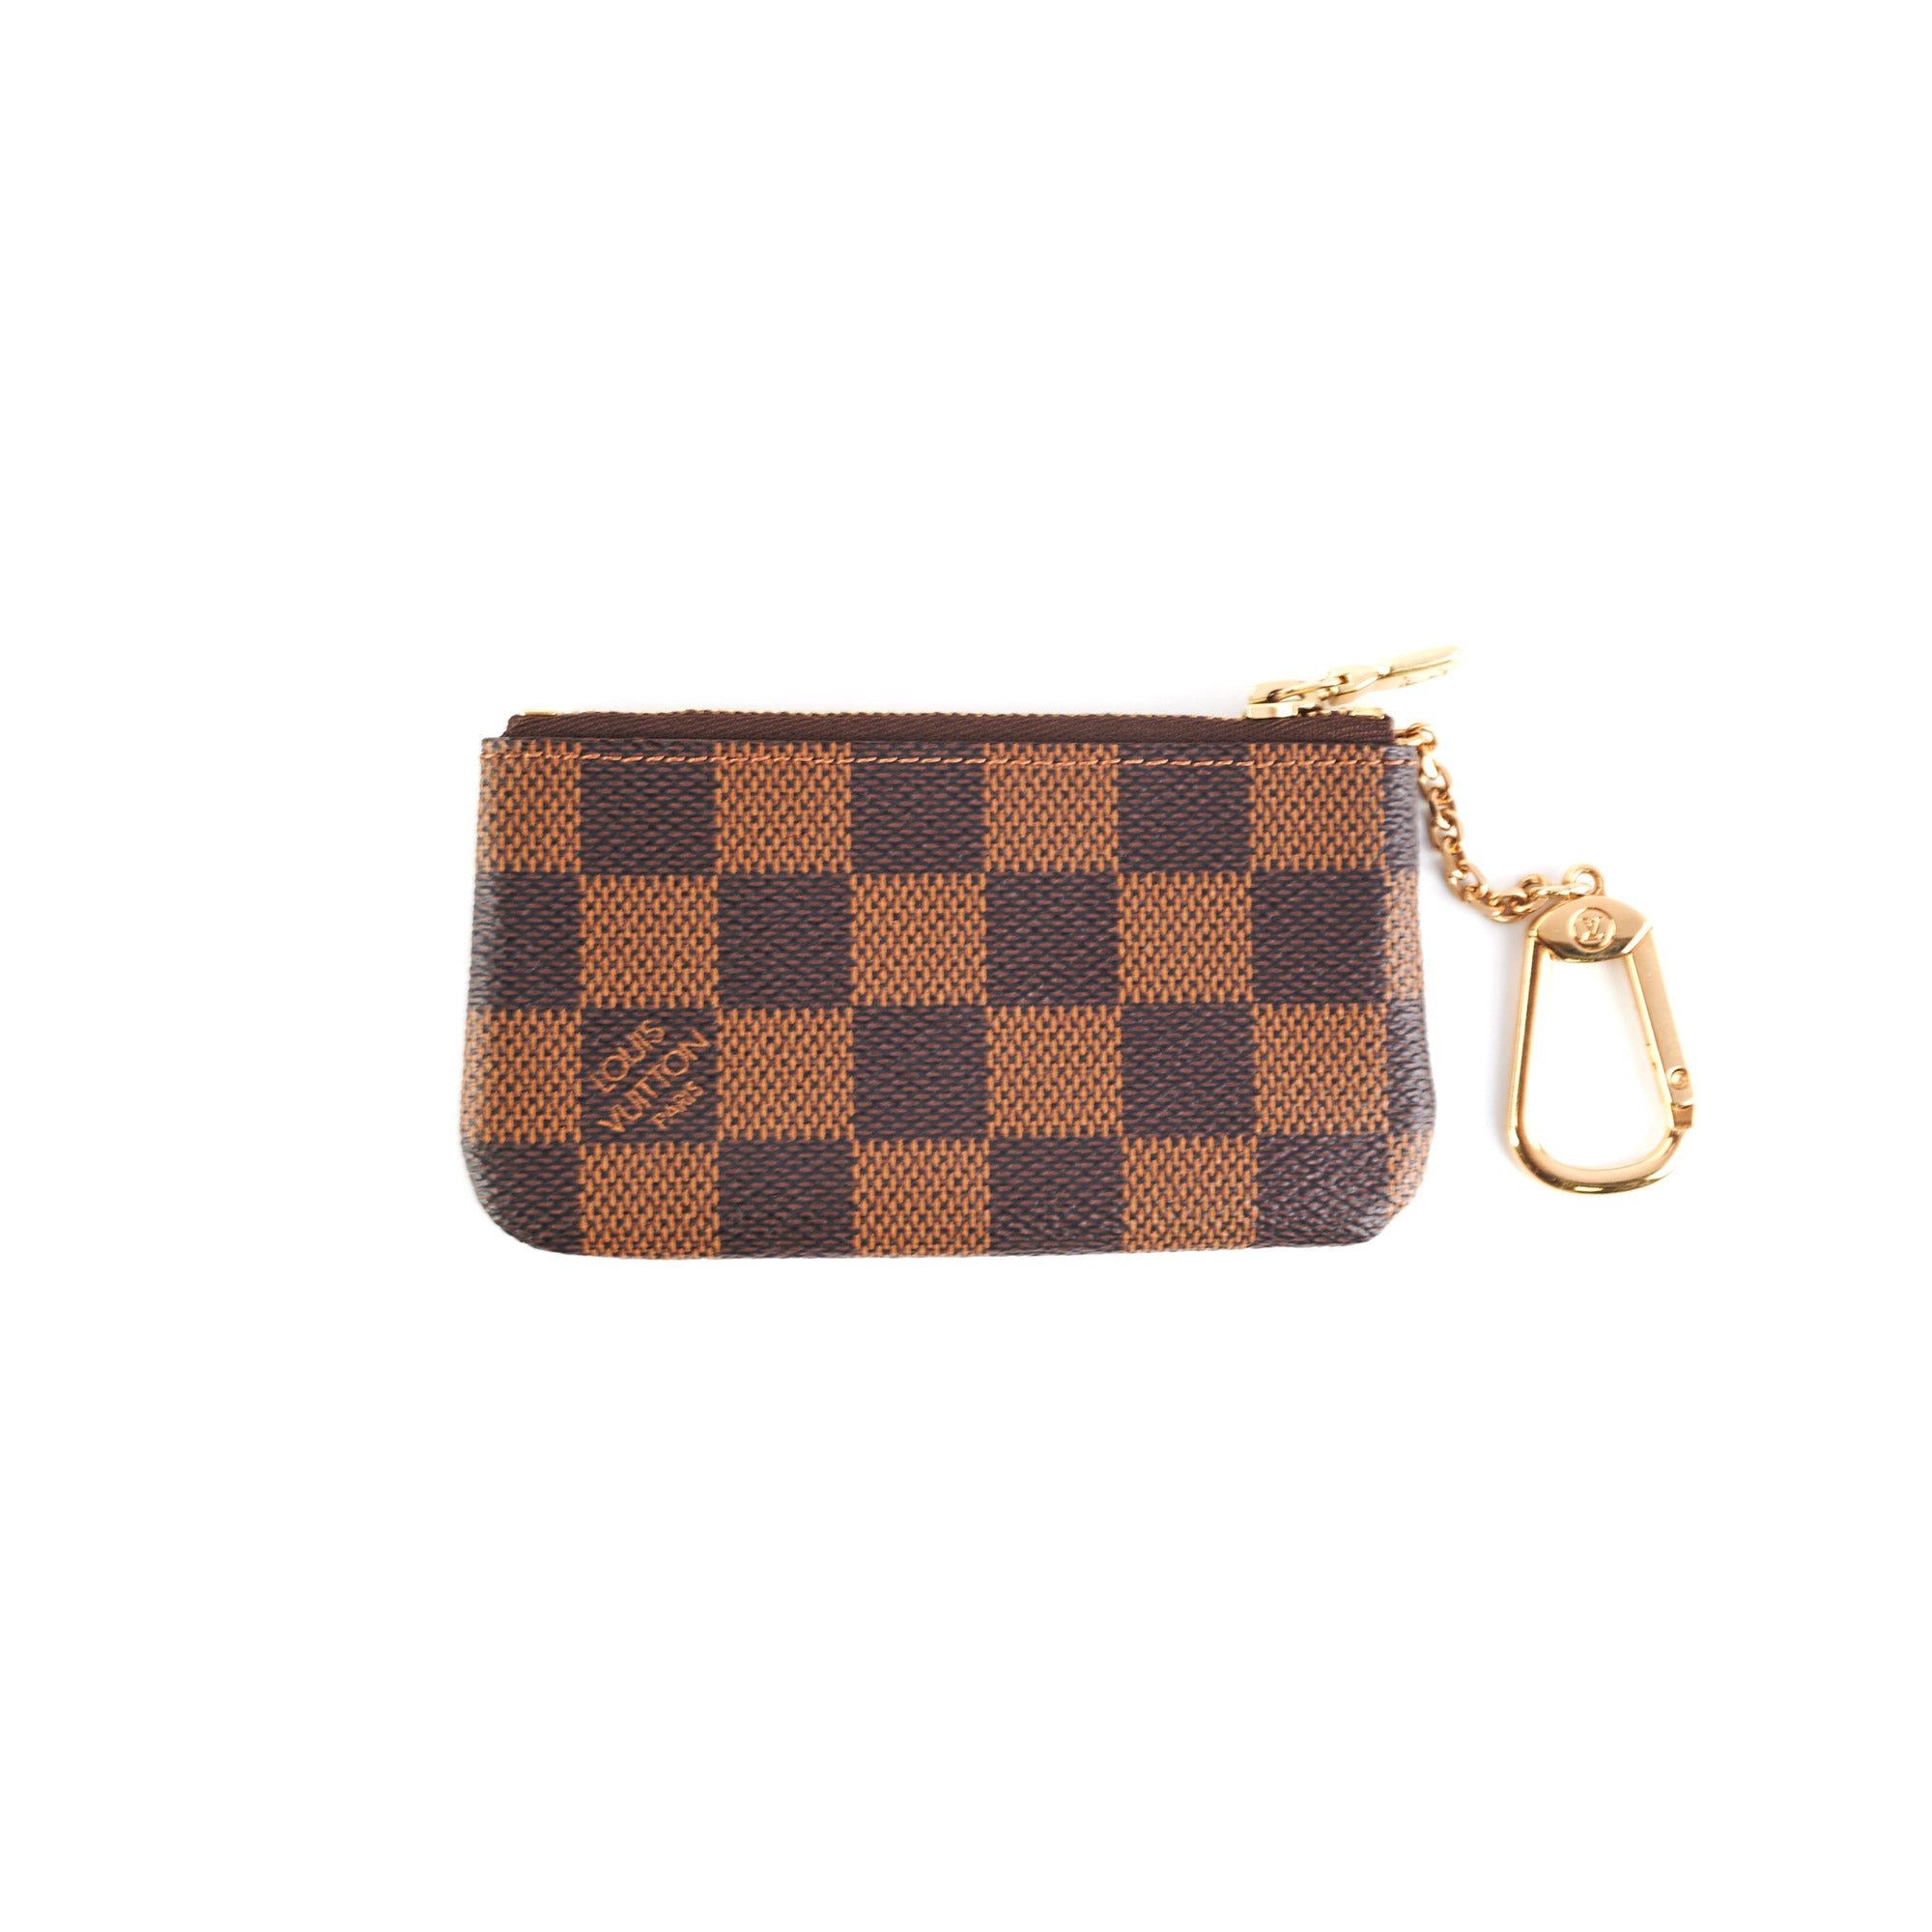 BRAND NEW - AUTHENTIC* LOUIS VUITTON Key Pouch Cles Damier Ebene N62658 NWT